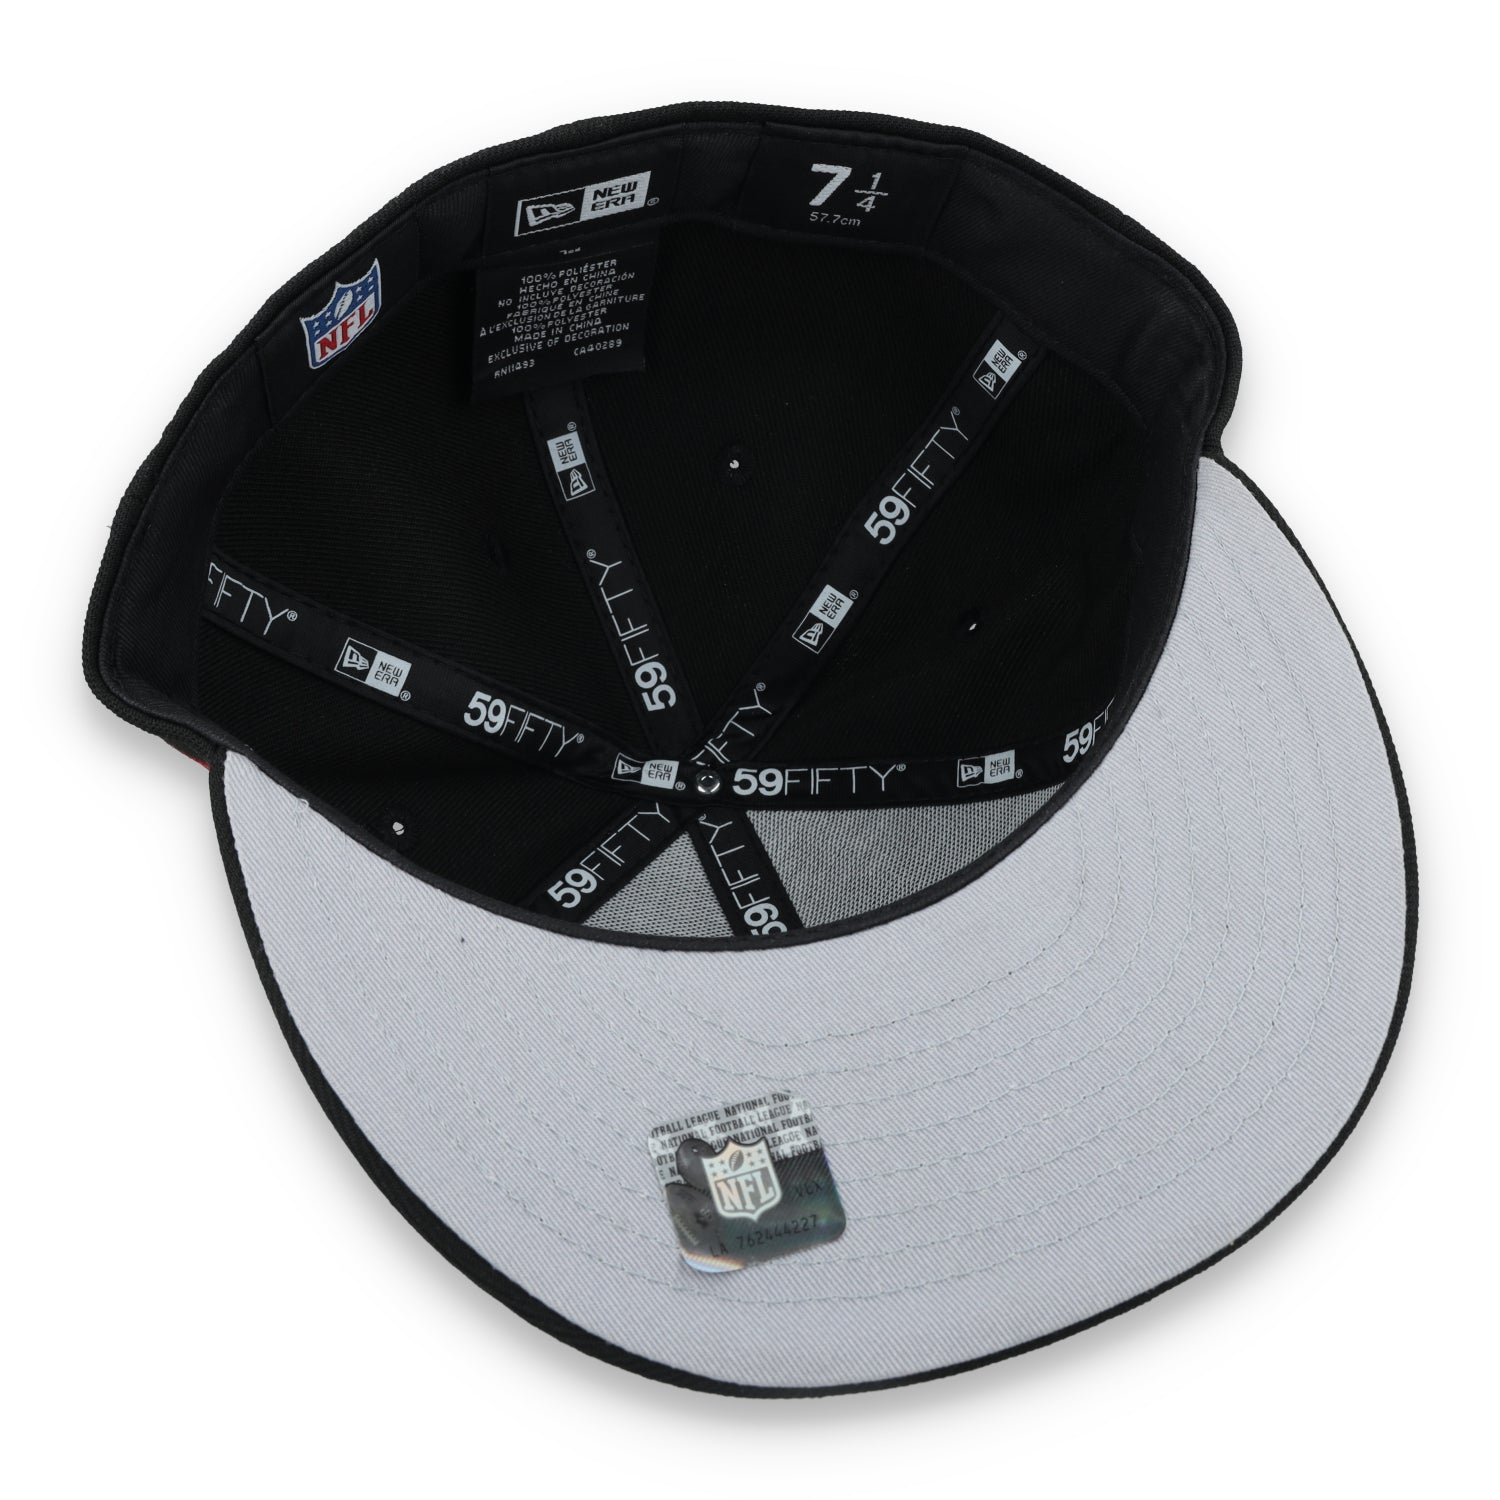 New Era San Francisco 49ers Super Bowl LVIII Side Patch 59FIFTY Fitted Hat-Black